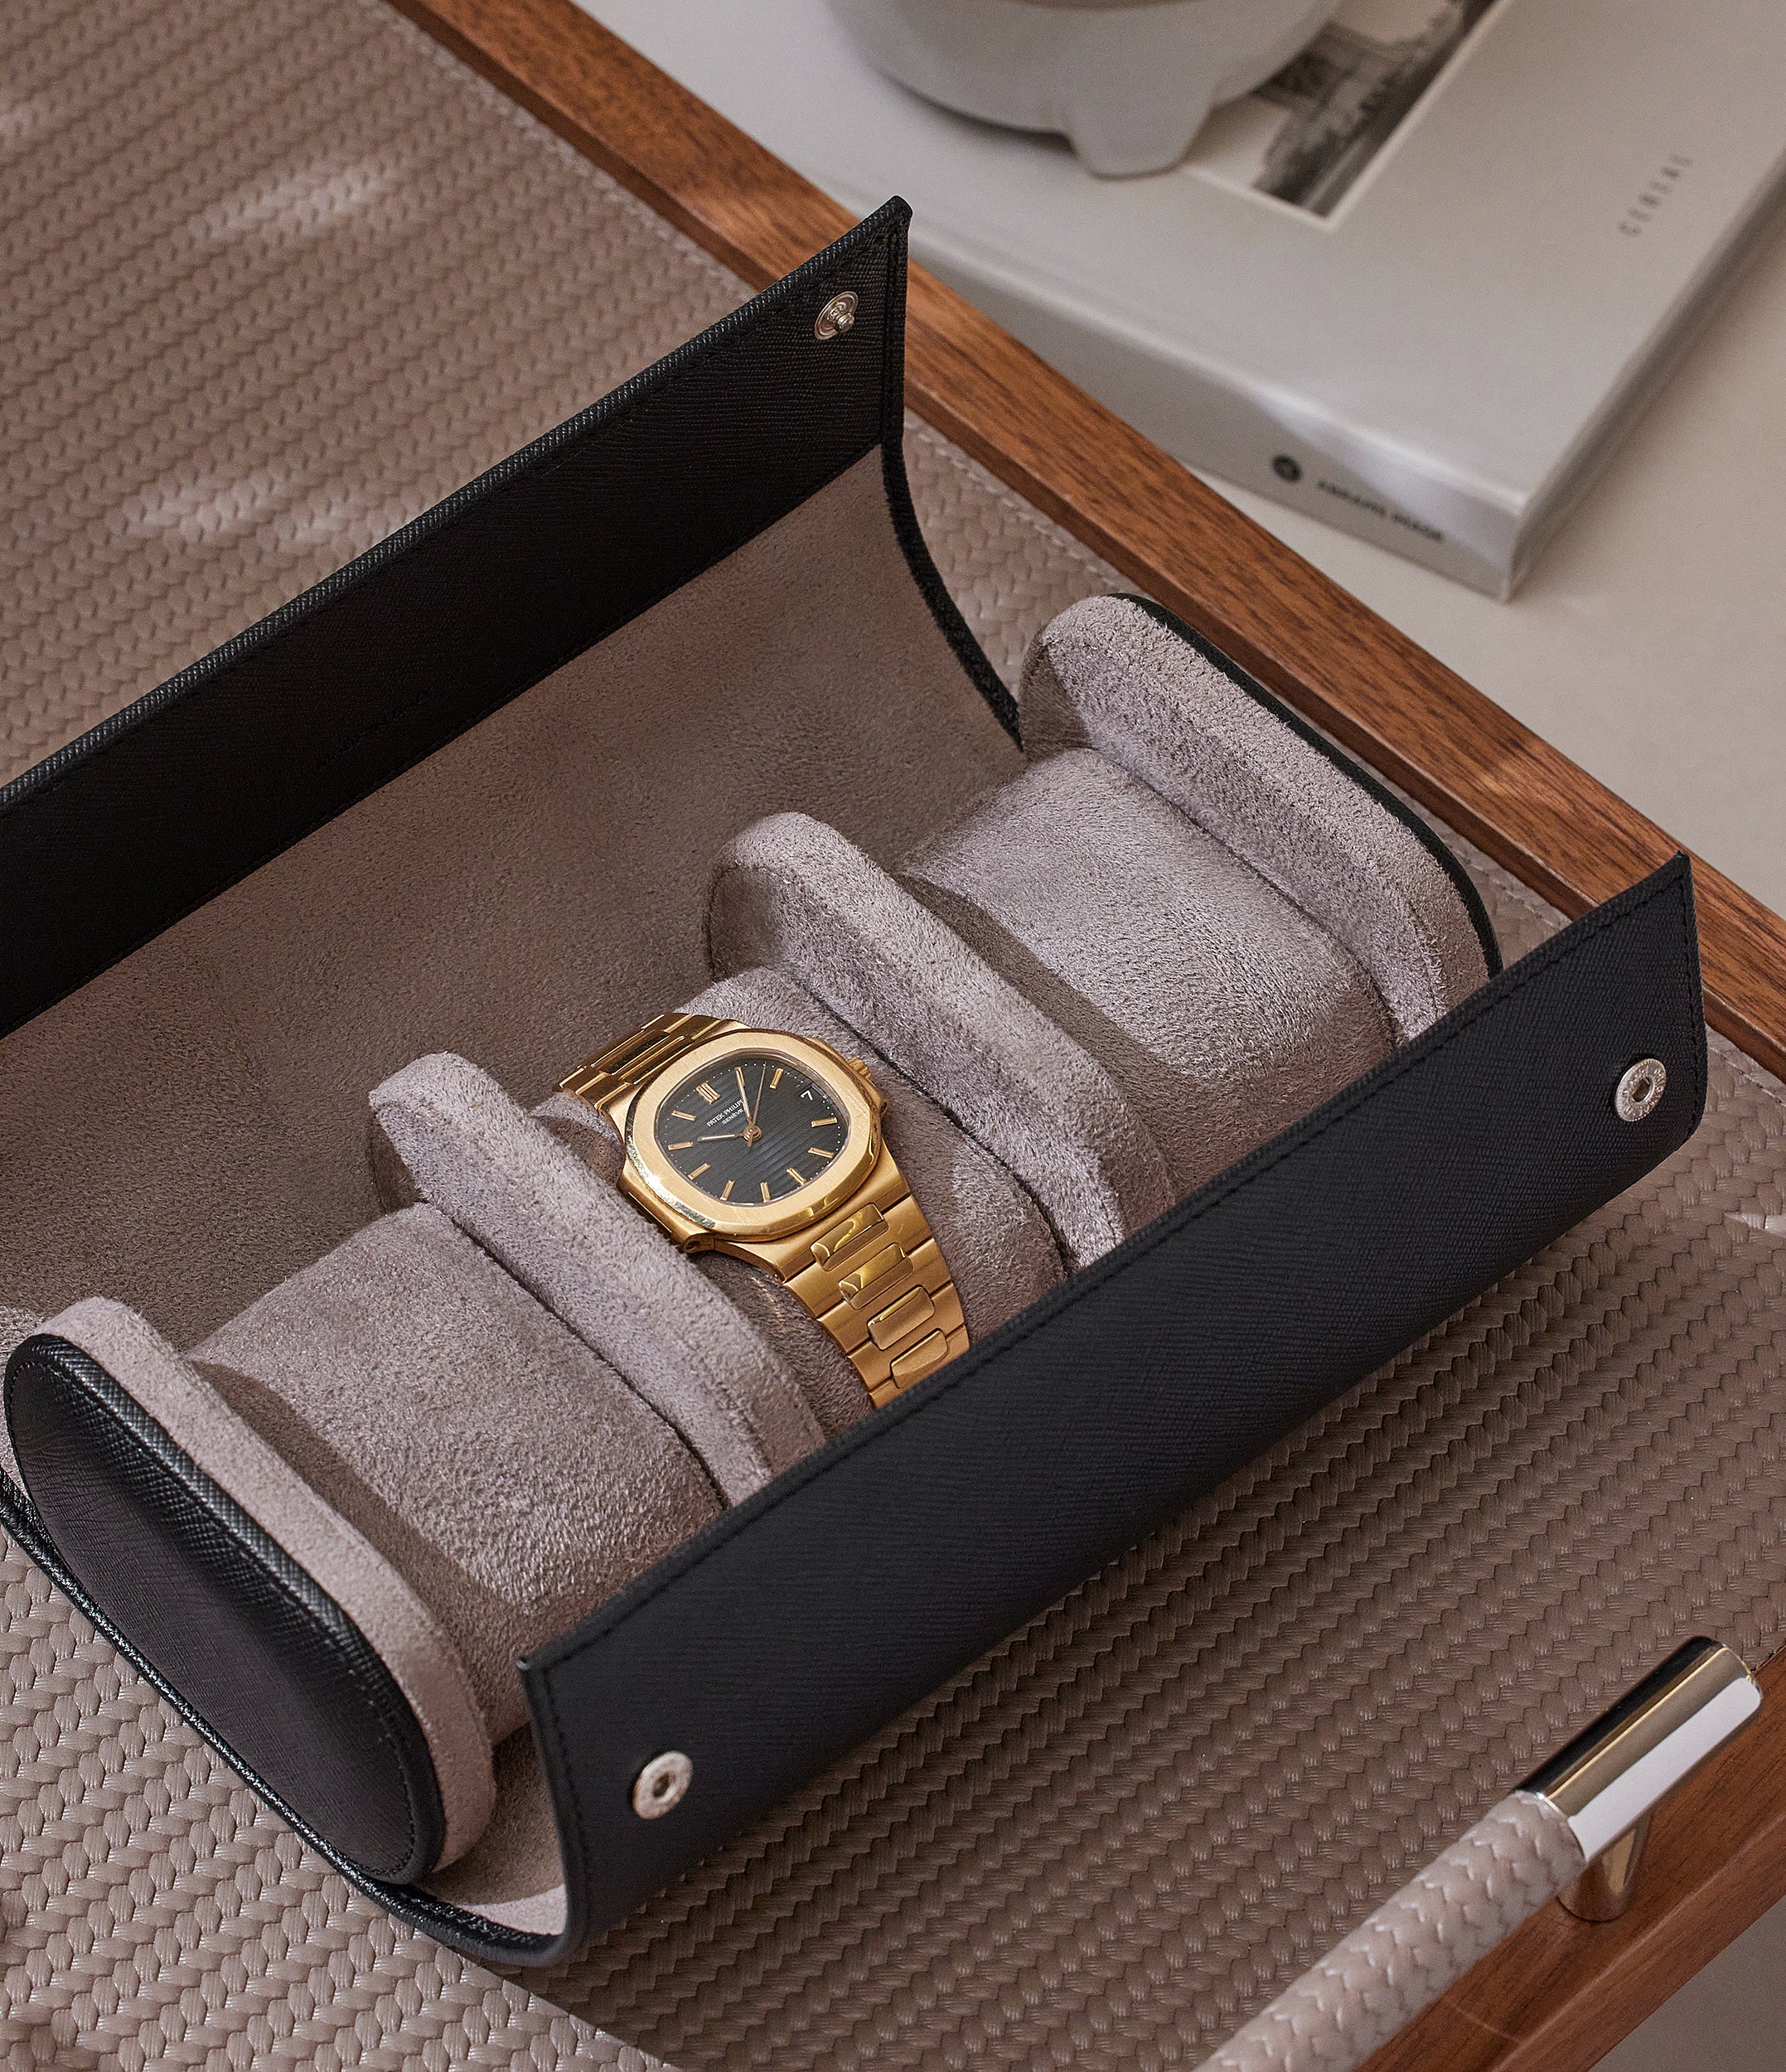 Watch Roll: A Stylish and Functional Accessory for Your Timepieces